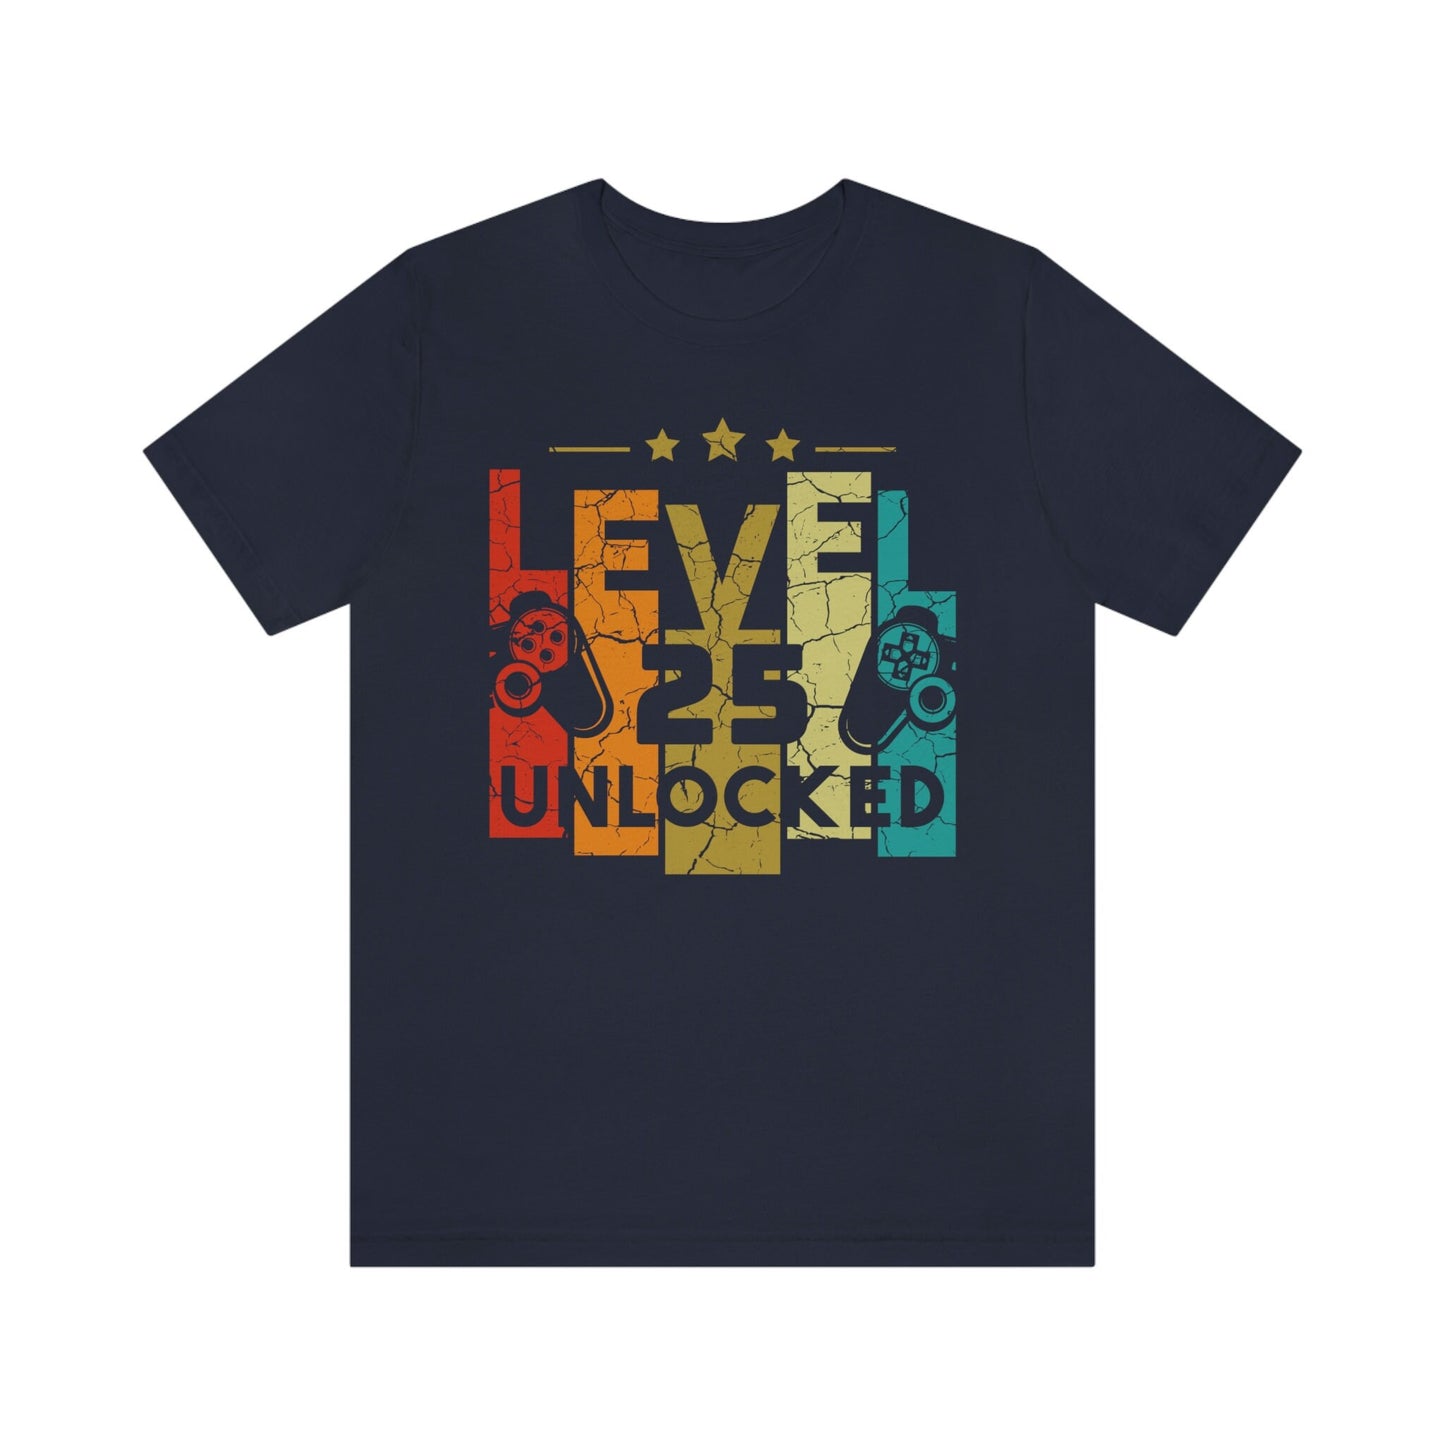 Level 25 Unlocked - Gamer Gift Shirt for son or daughter, Funny T-Shirt for 25th Birthday